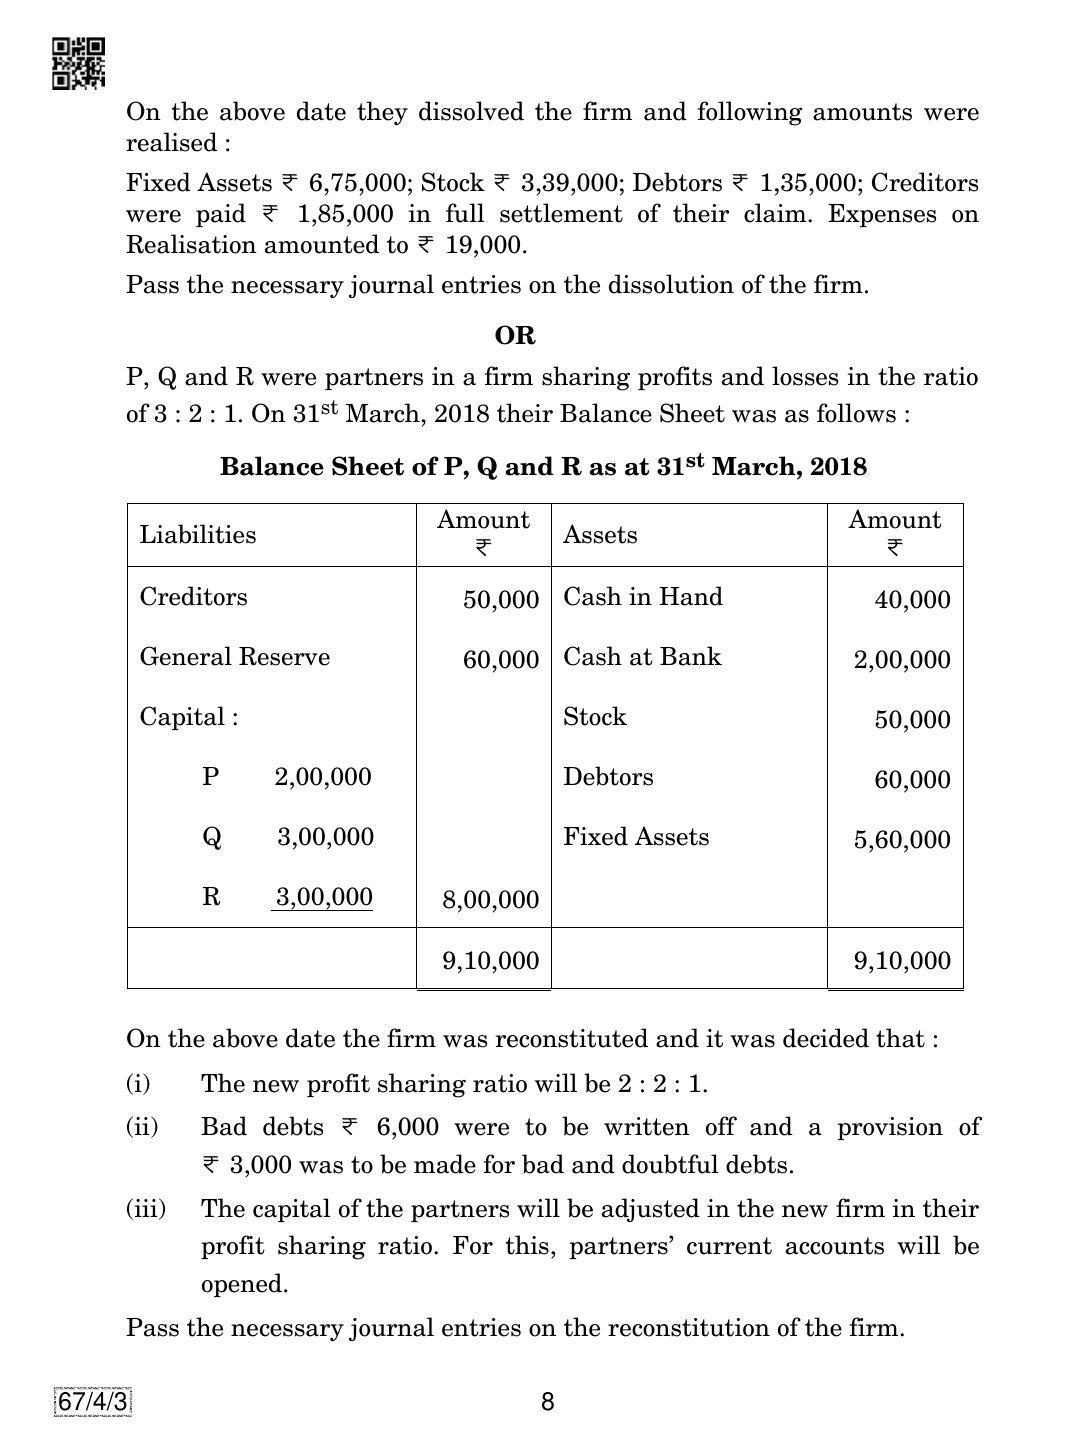 CBSE Class 12 67-4-3 Accountancy 2019 Question Paper - Page 8